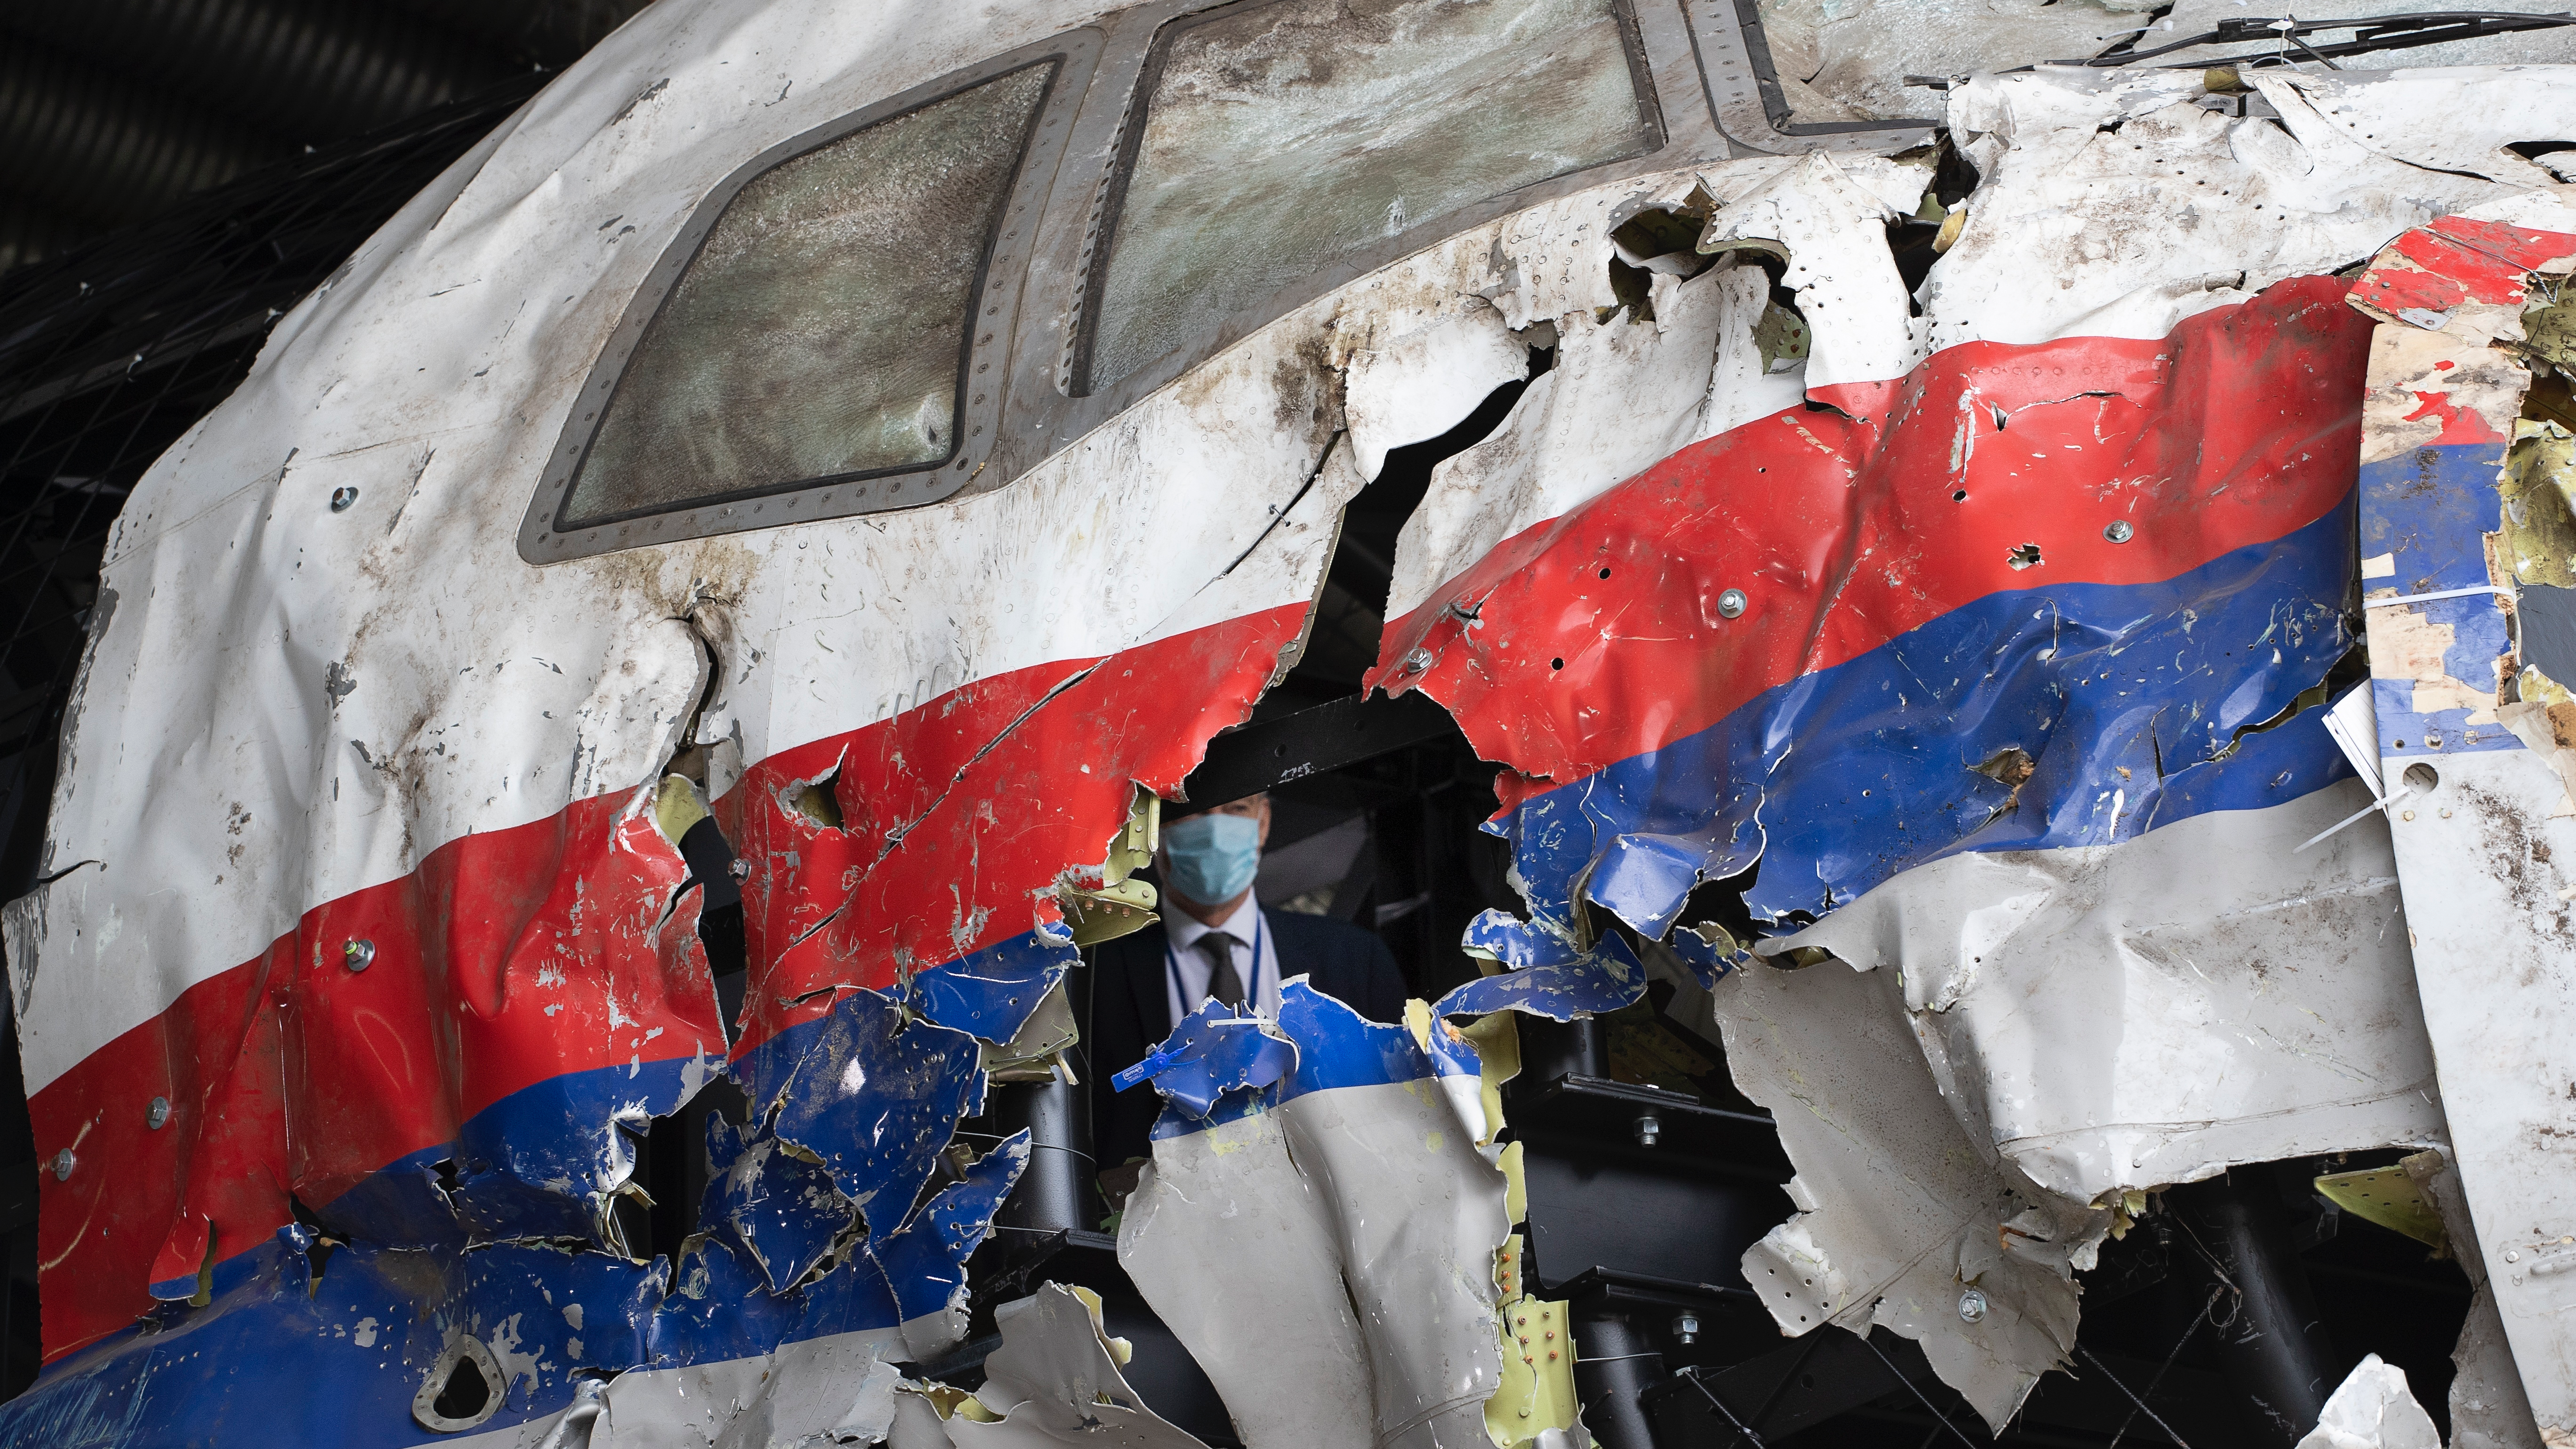 The Malaysian Airlines MH17 flight was shot down over separatist-held eastern Ukraine on July 17, 2014. /Peter Dejong/AP